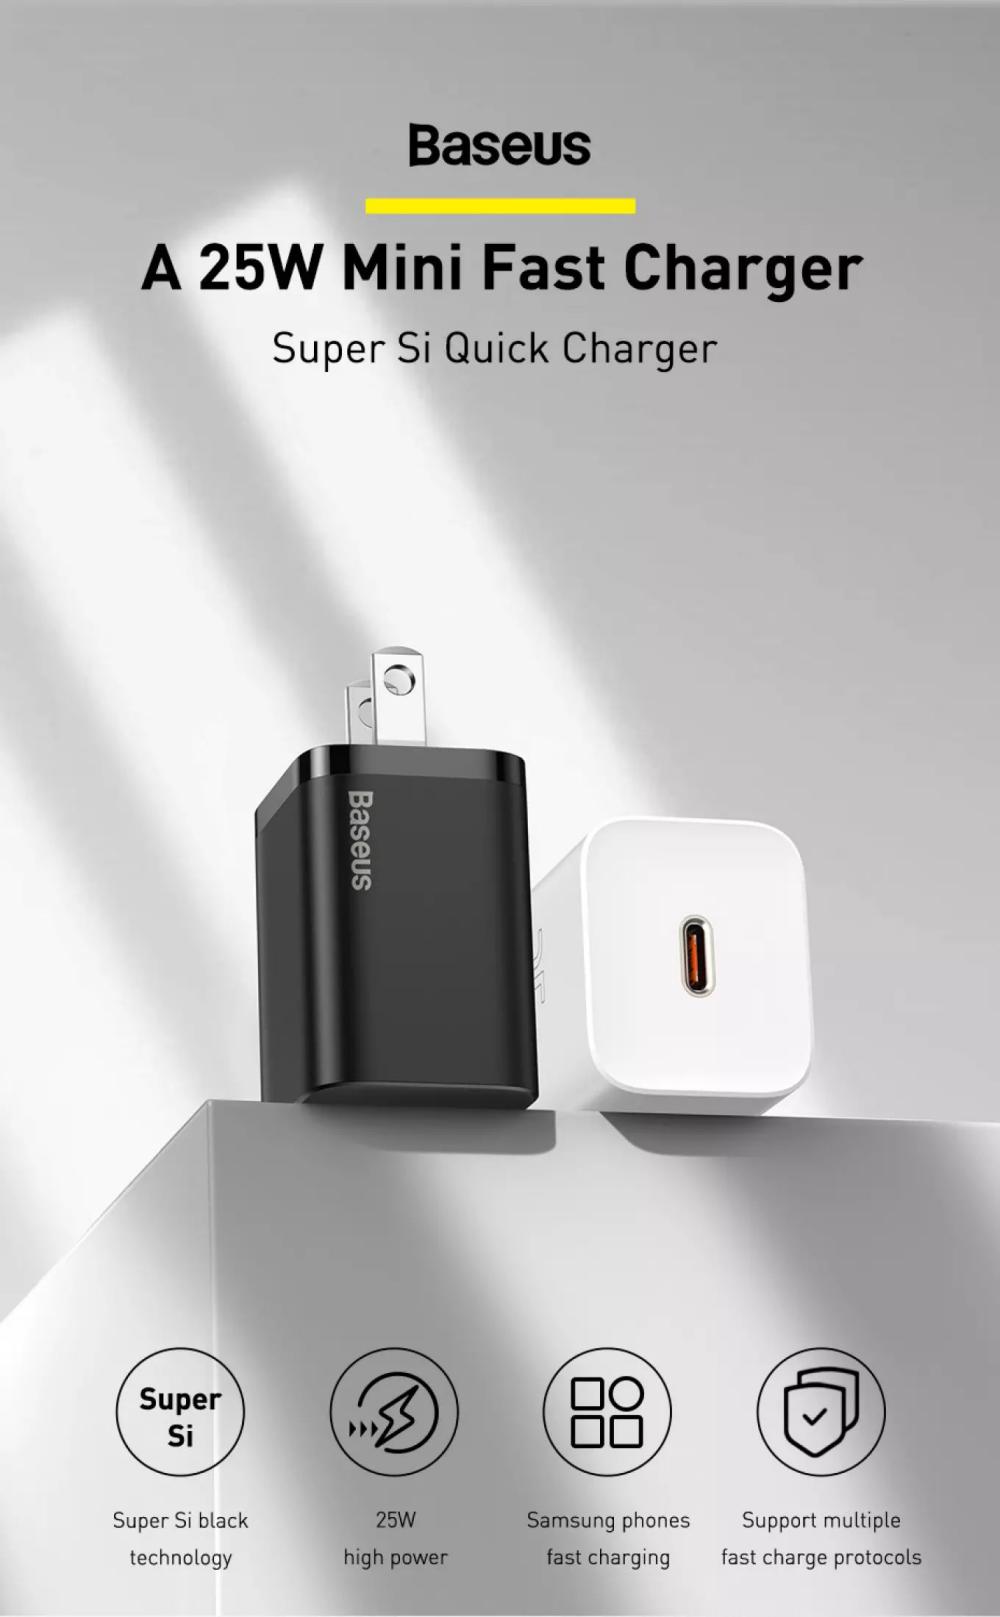 Baseus Super Si 25w Adapter 1c Quick Charger (4)